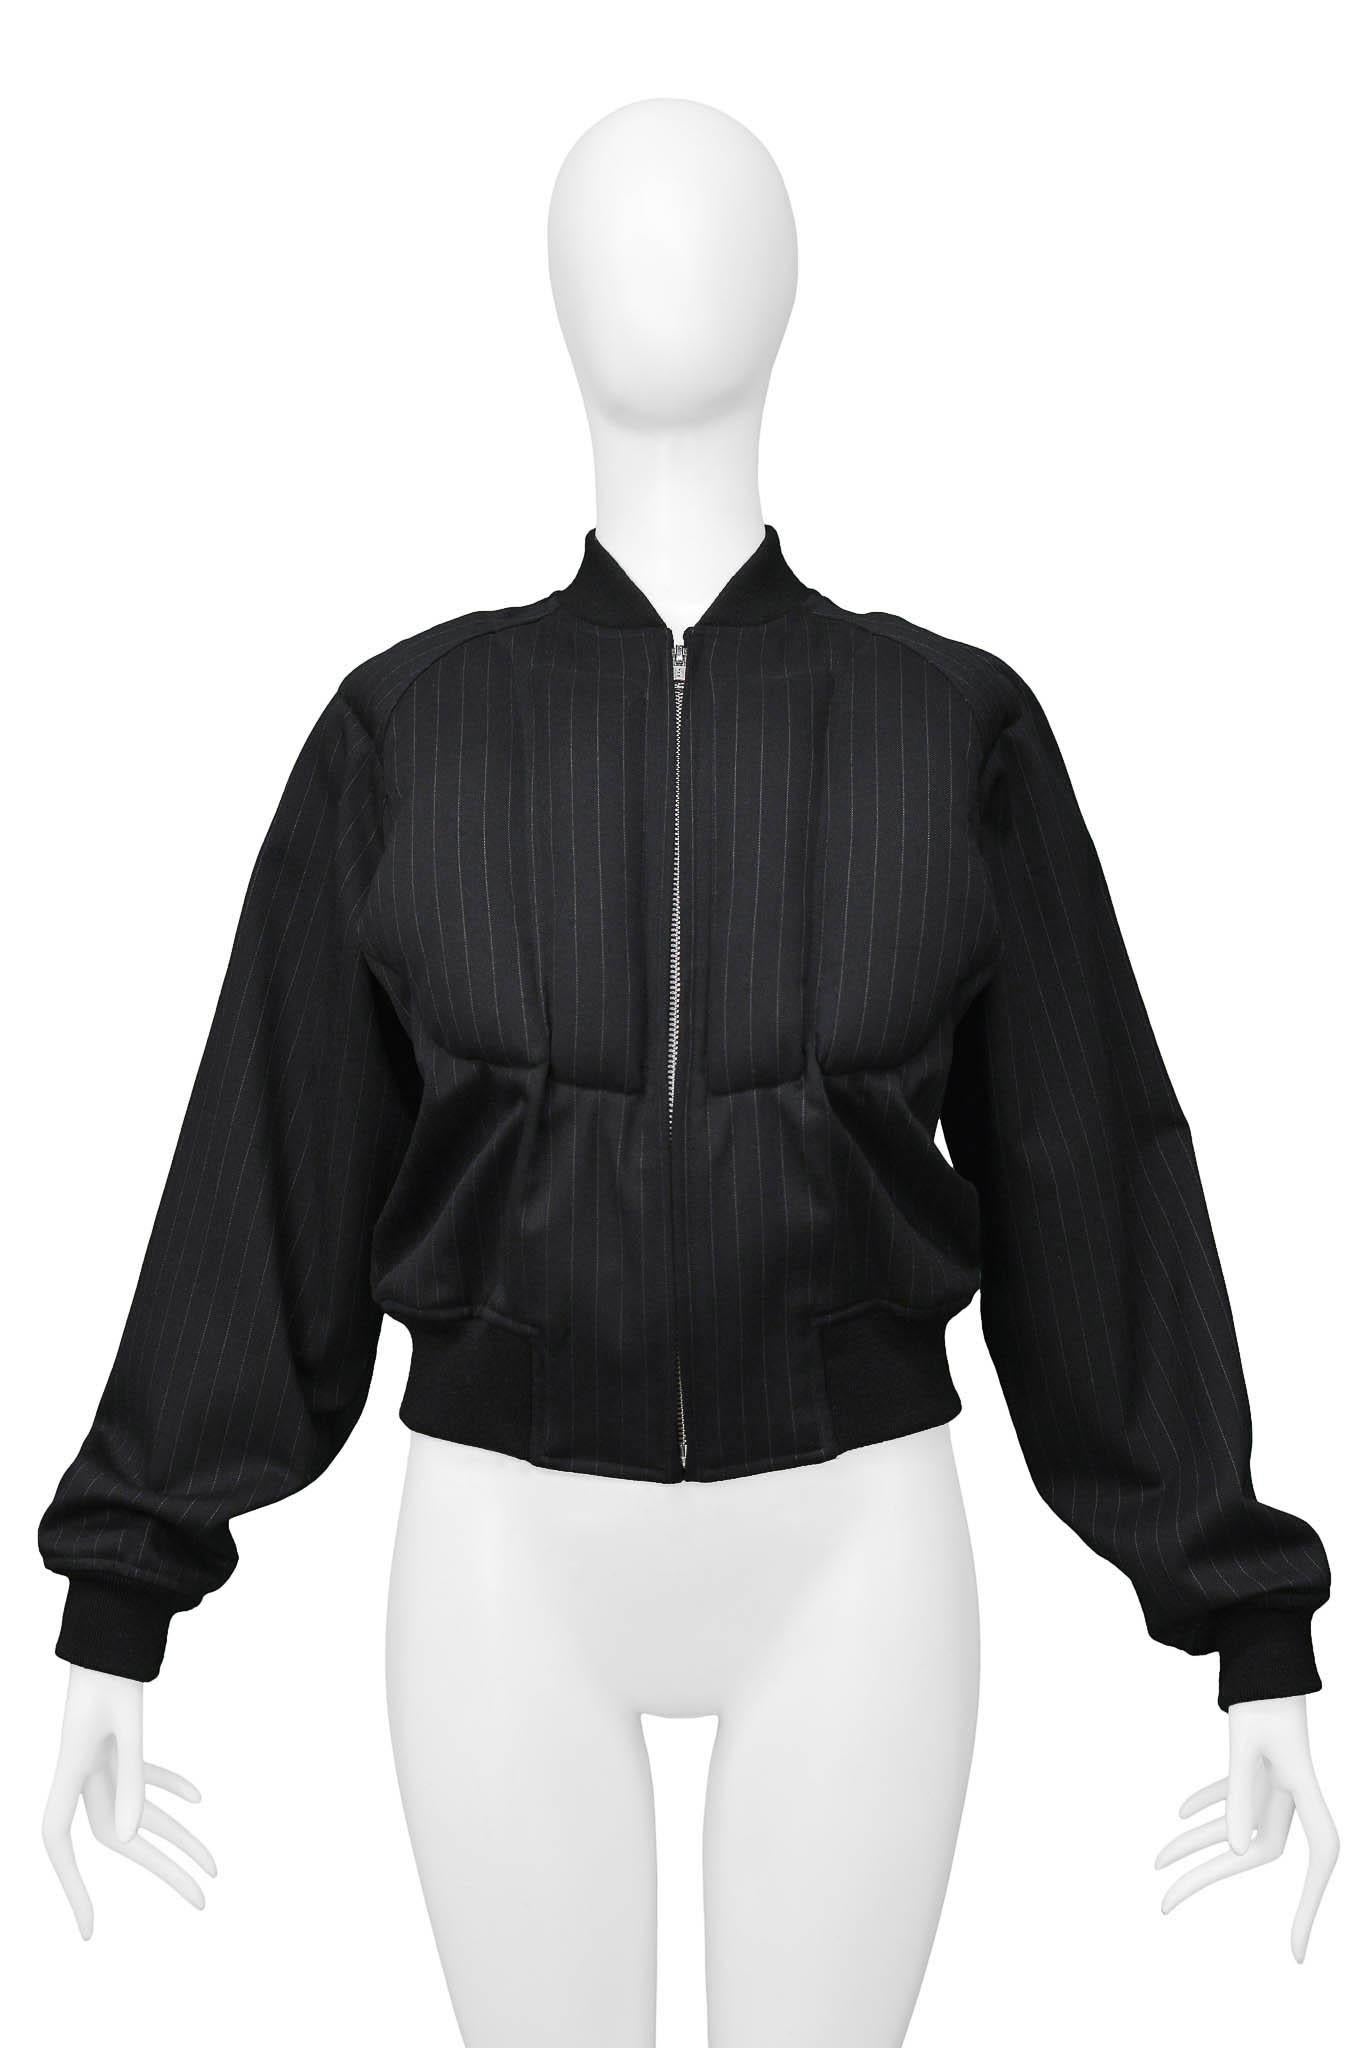 Resurrection Vintage is excited to offer a vintage Comme des Garcons black pinstripe jacket featuring padding along the front and back of the jacket, metal zipper, and black ribbing along the sleeves, waist and collar.  

Comme Des Garcons
Size: